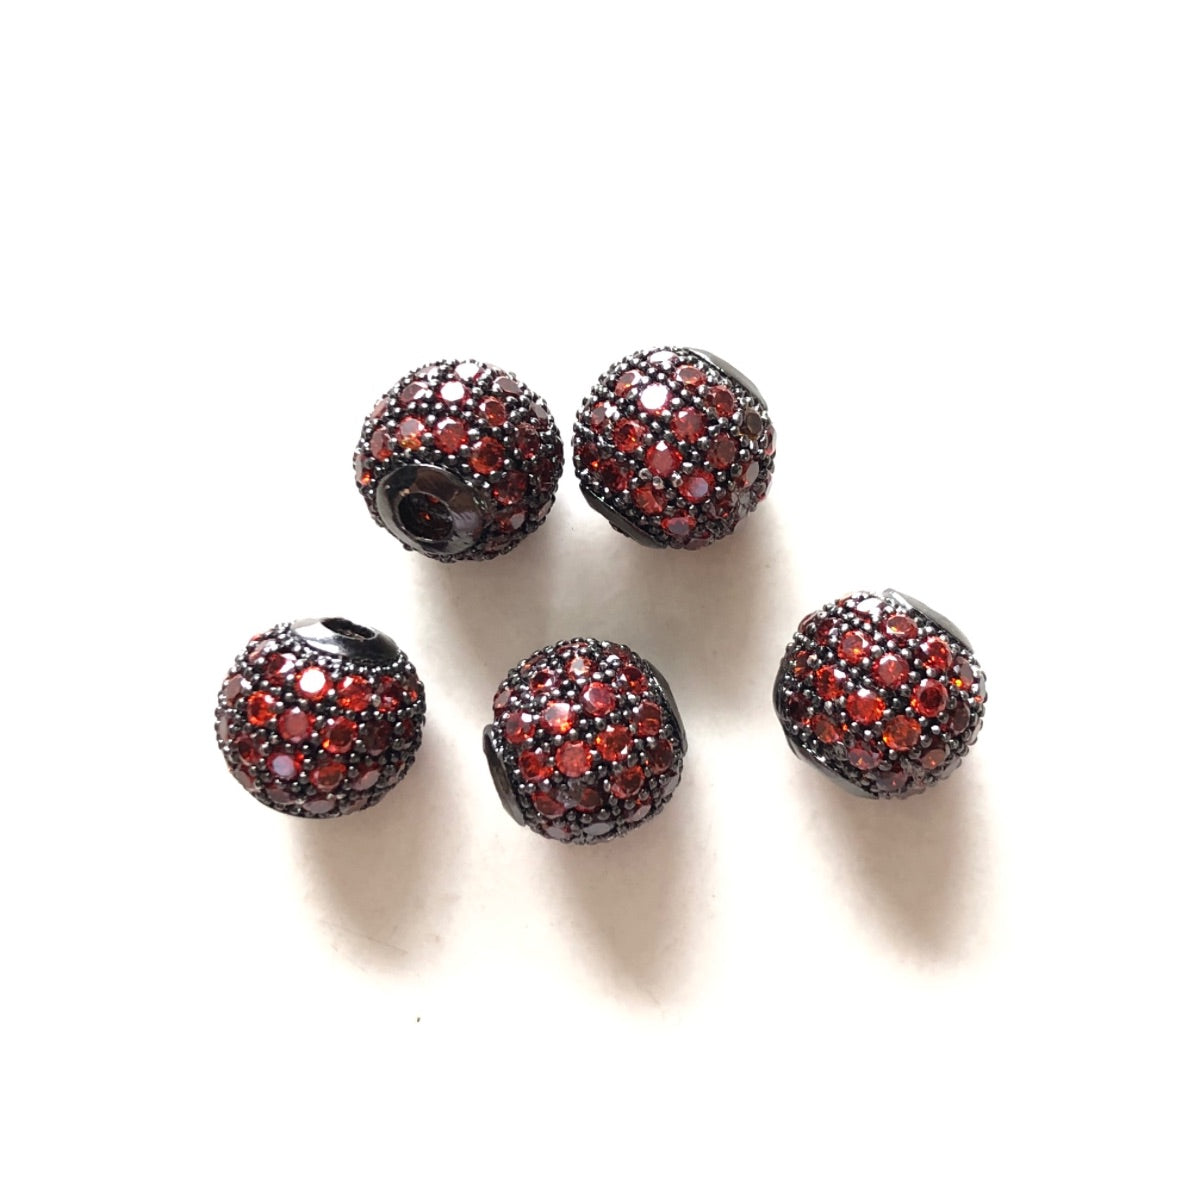 10pcs/lot 6mm, 8mm Colorful CZ Paved Ball Spacers Black Reddish Orange CZ Paved Spacers 6mm Beads 8mm Beads Ball Beads Colorful Zirconia New Spacers Arrivals Charms Beads Beyond